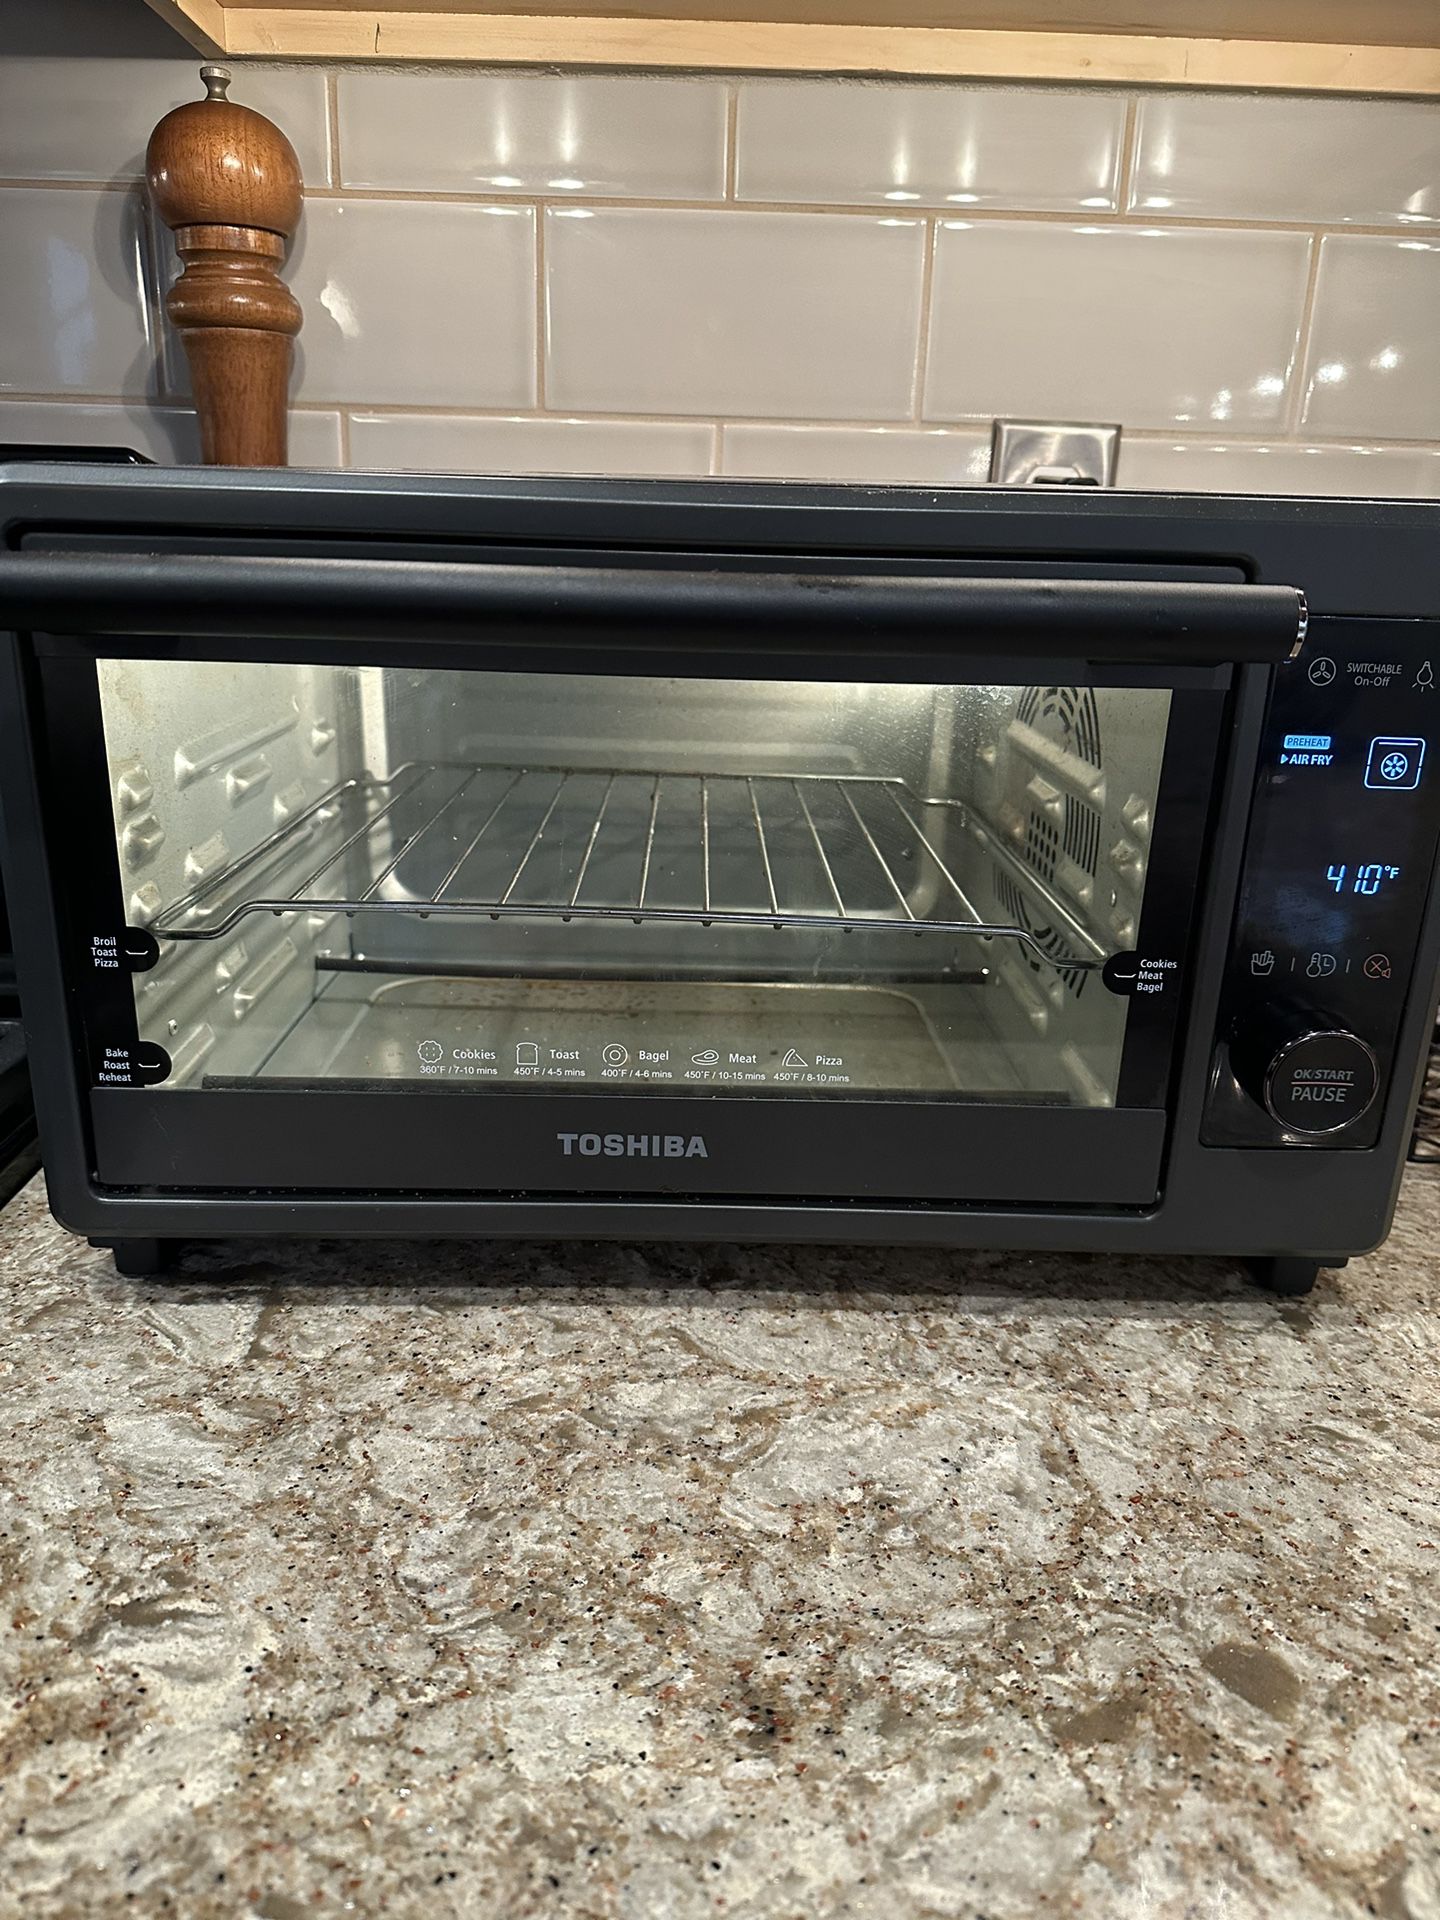 Toshiba Toaster Oven / Air fryer